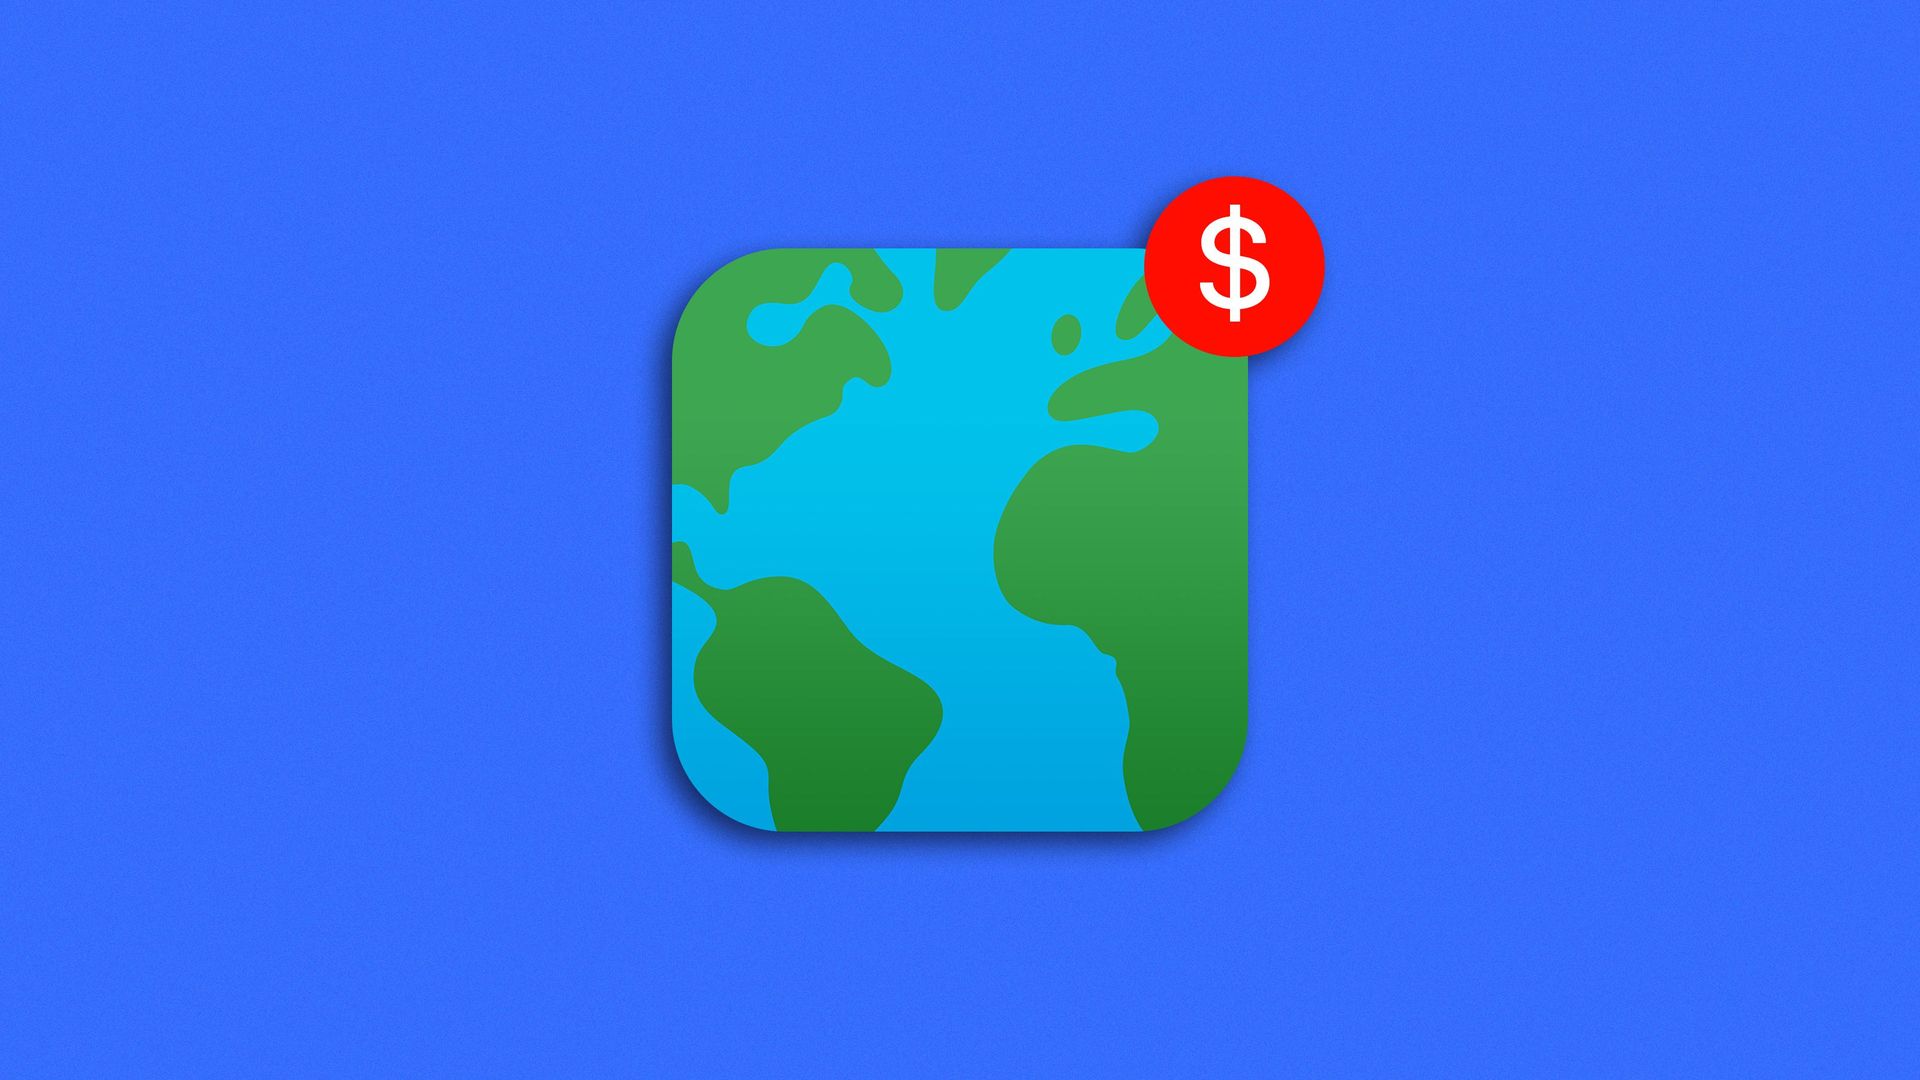 Illustration of an earth app icon with a notifications symbol that says 